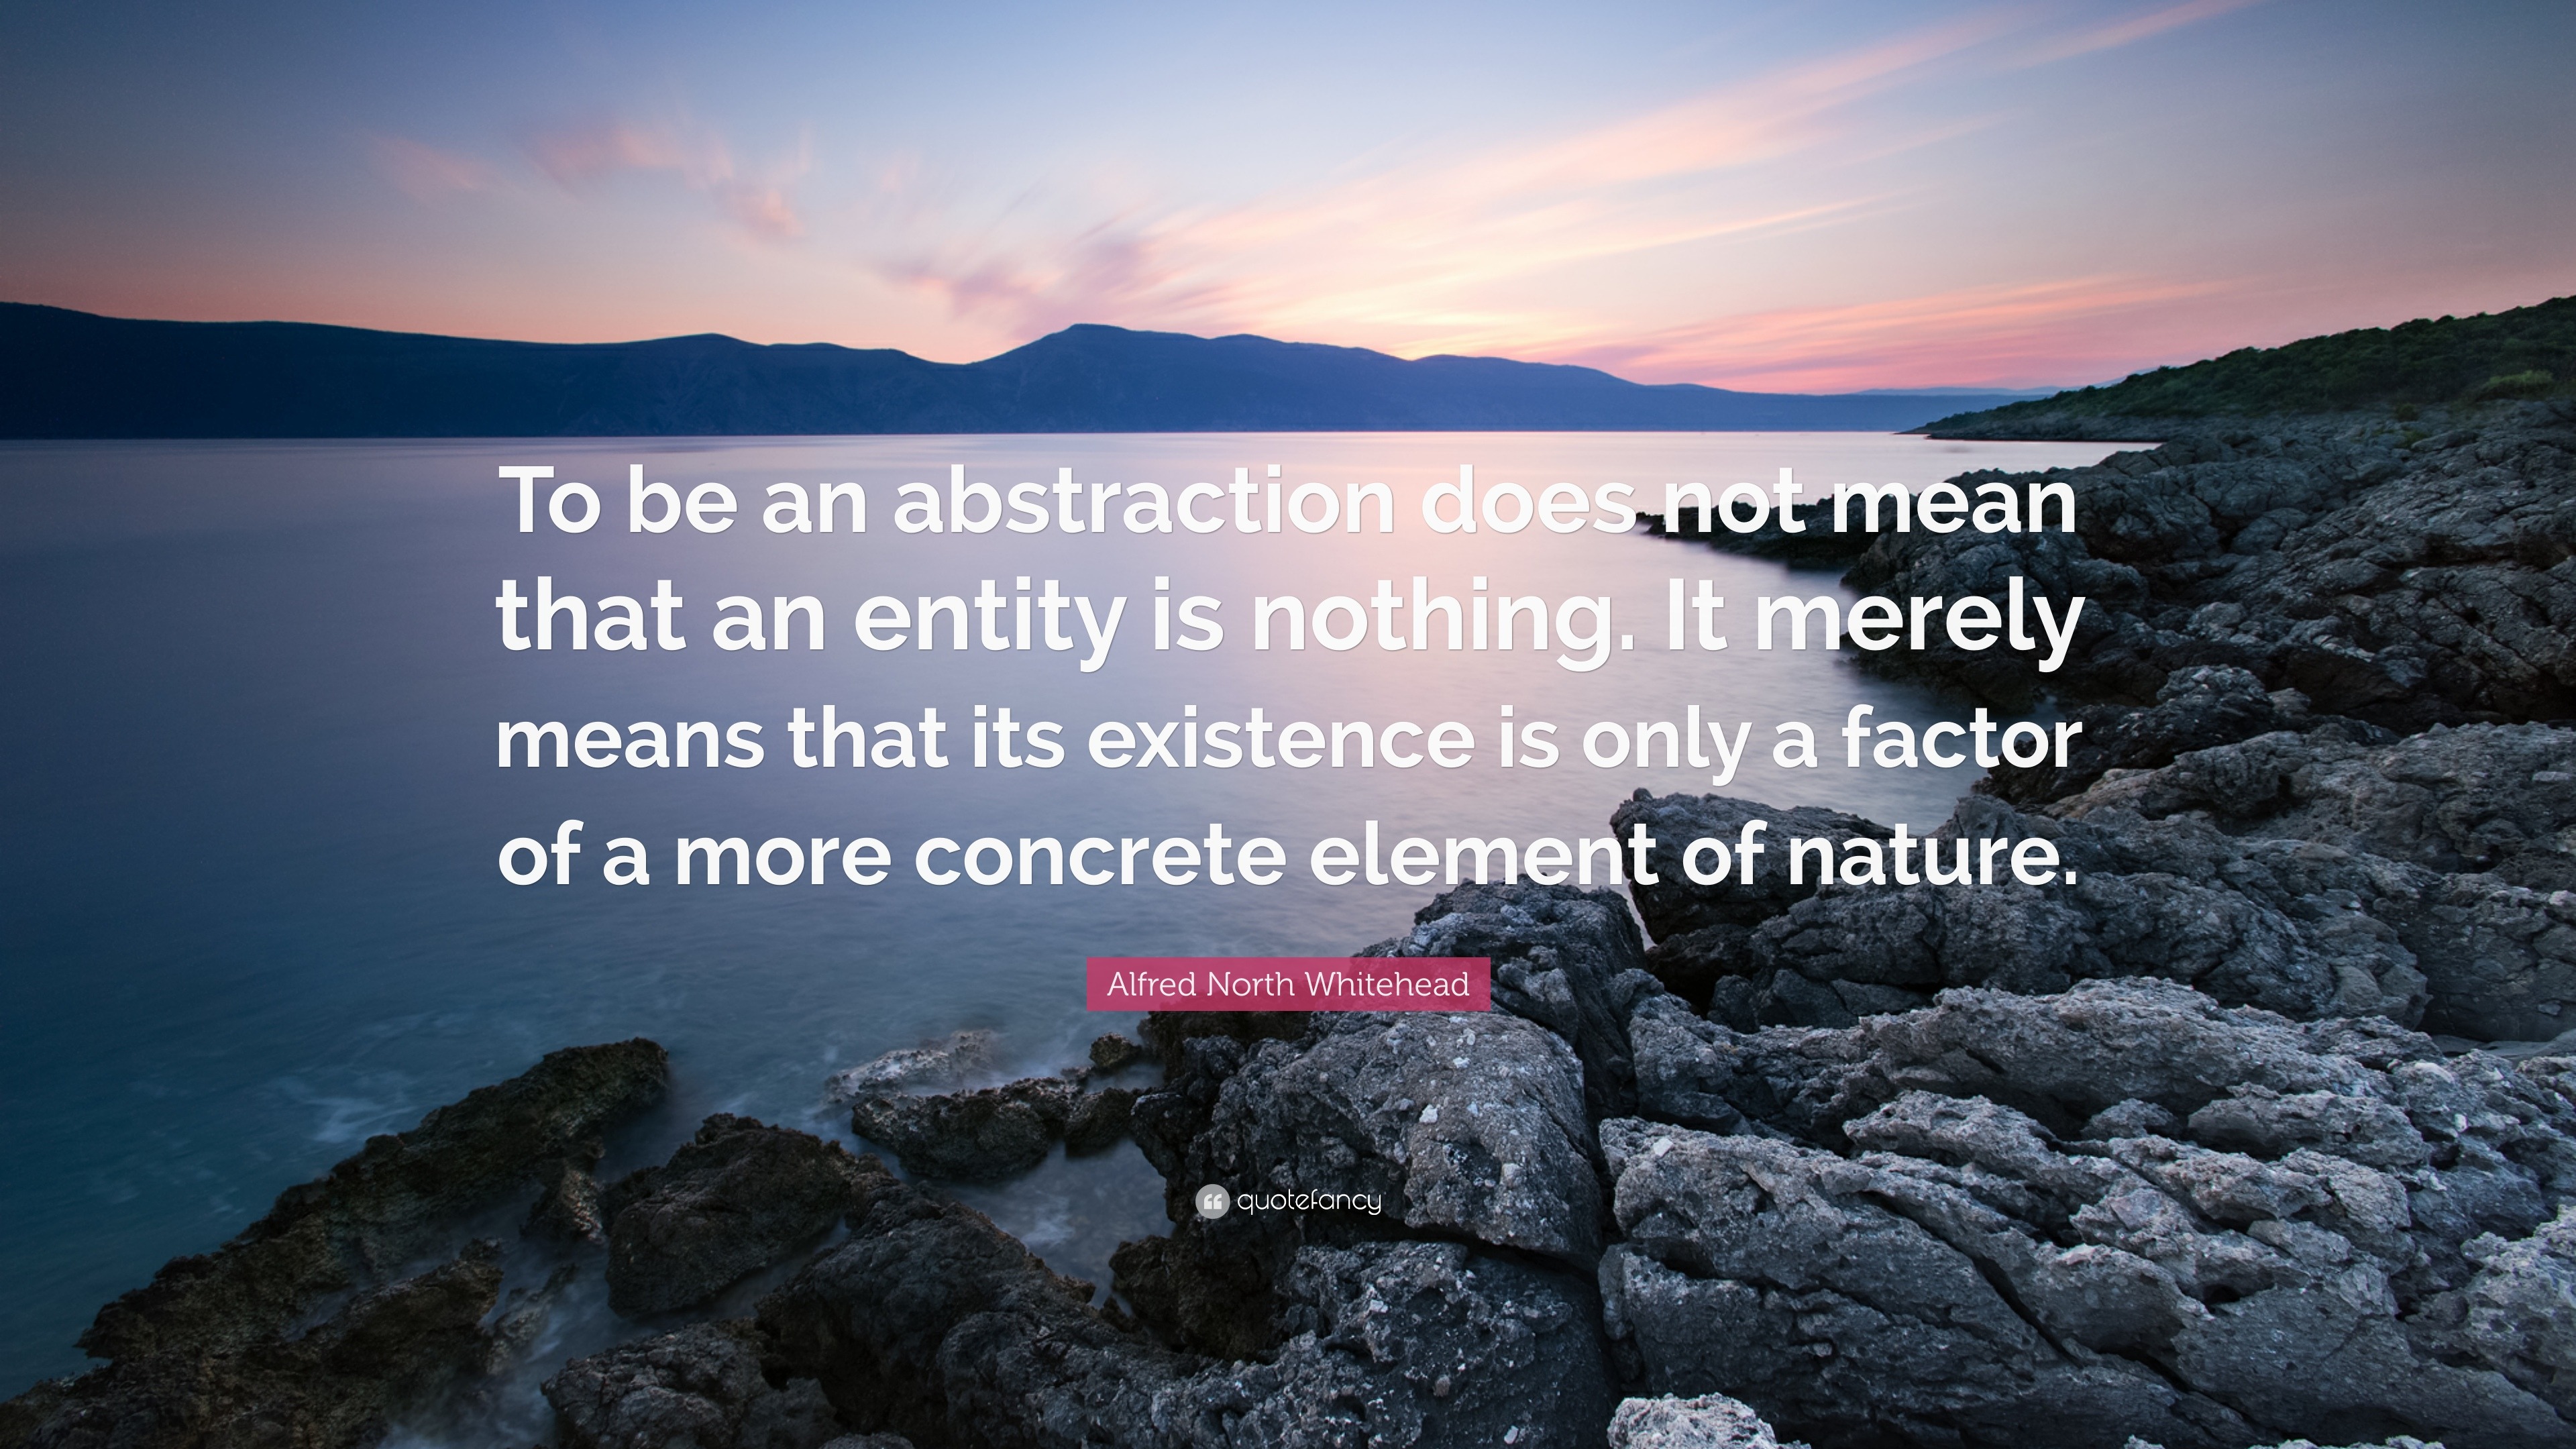 Alfred North Whitehead Quote: “To be an abstraction does not mean that an  entity is nothing. It merely means that its existence is only a factor of a  m”